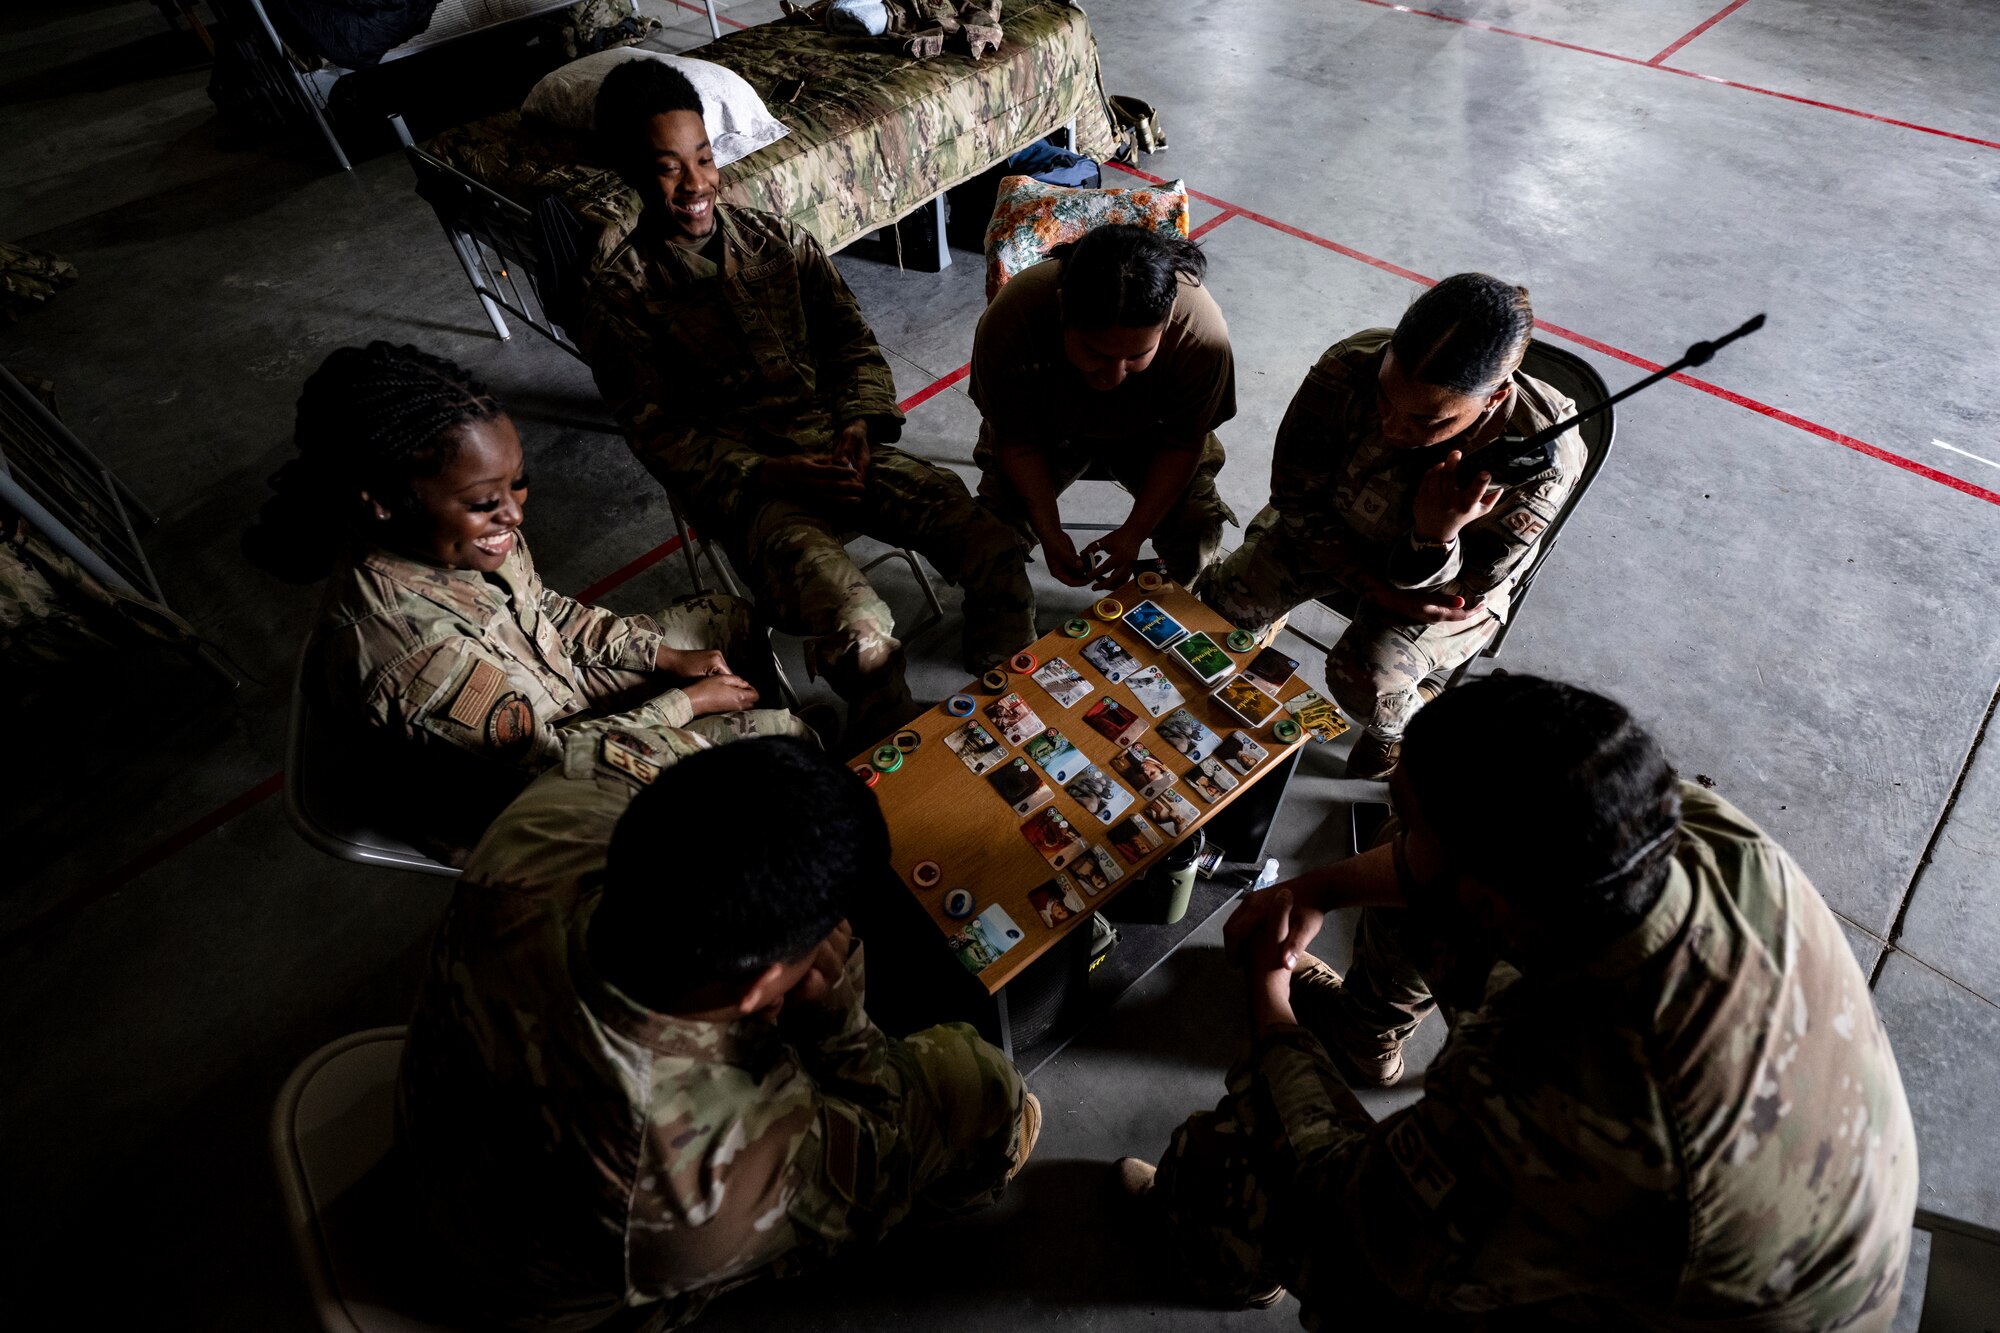 U.S. Air Force Airmen assigned to the 23rd Security Forces Squadron play a card game at Avon Park Air Force Range, Florida, April 9, 2024. Airmen established a living area inside a hangar for exercise Ready Tiger 24-1 and participated in morale-boosting activities, which is critical to maintaining mental readiness for mission success. During Ready Tiger 24-1, exercise inspectors will assess the 23rd Wing's proficiency in employing decentralized command and control to fulfill air tasking orders across geographically dispersed areas amid communication challenges, integrating Agile Combat Employment principles such as integrated combat turns, forward aerial refueling points, multi-capable Airmen, and combat search and rescue capabilities. (U.S. Air Force photo by Tech. Sgt. Devin Boyer)